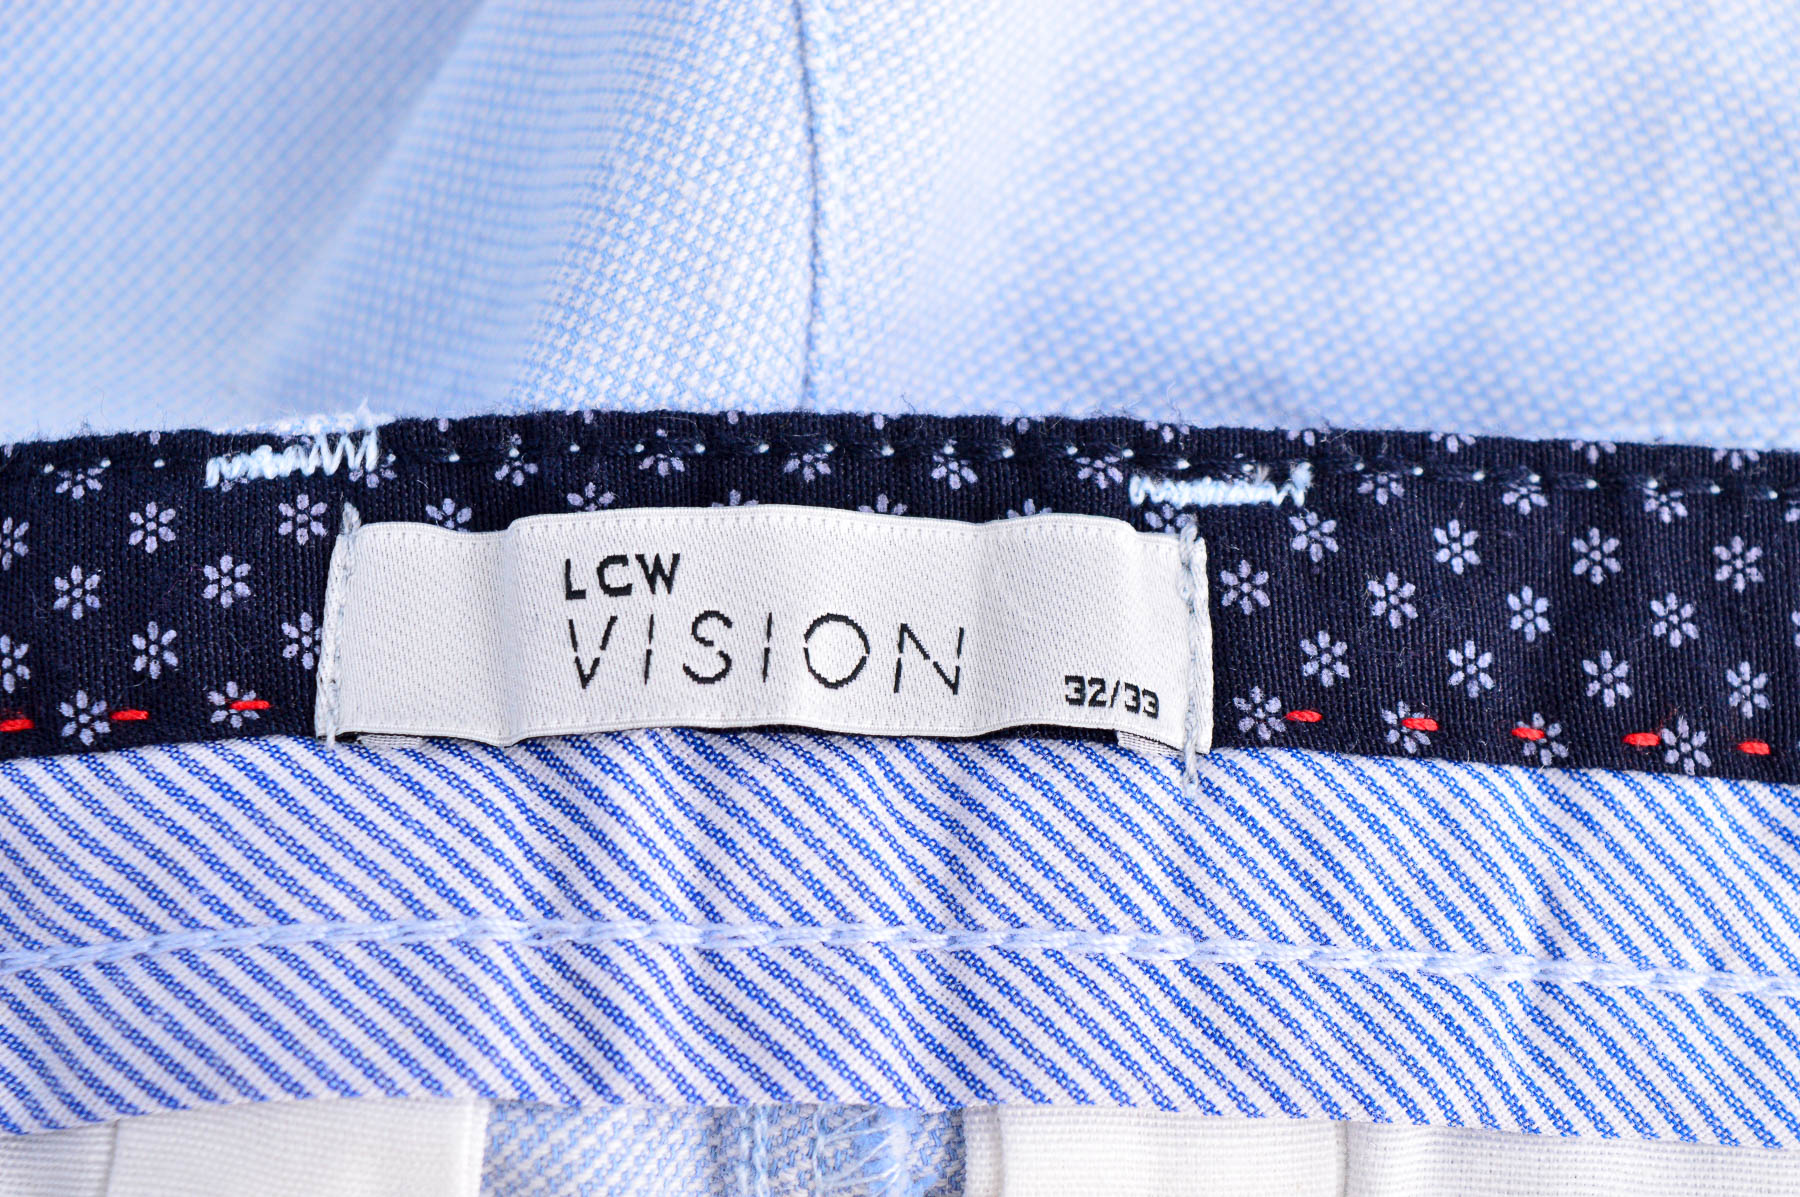 Men's trousers - LCW VISION - 2